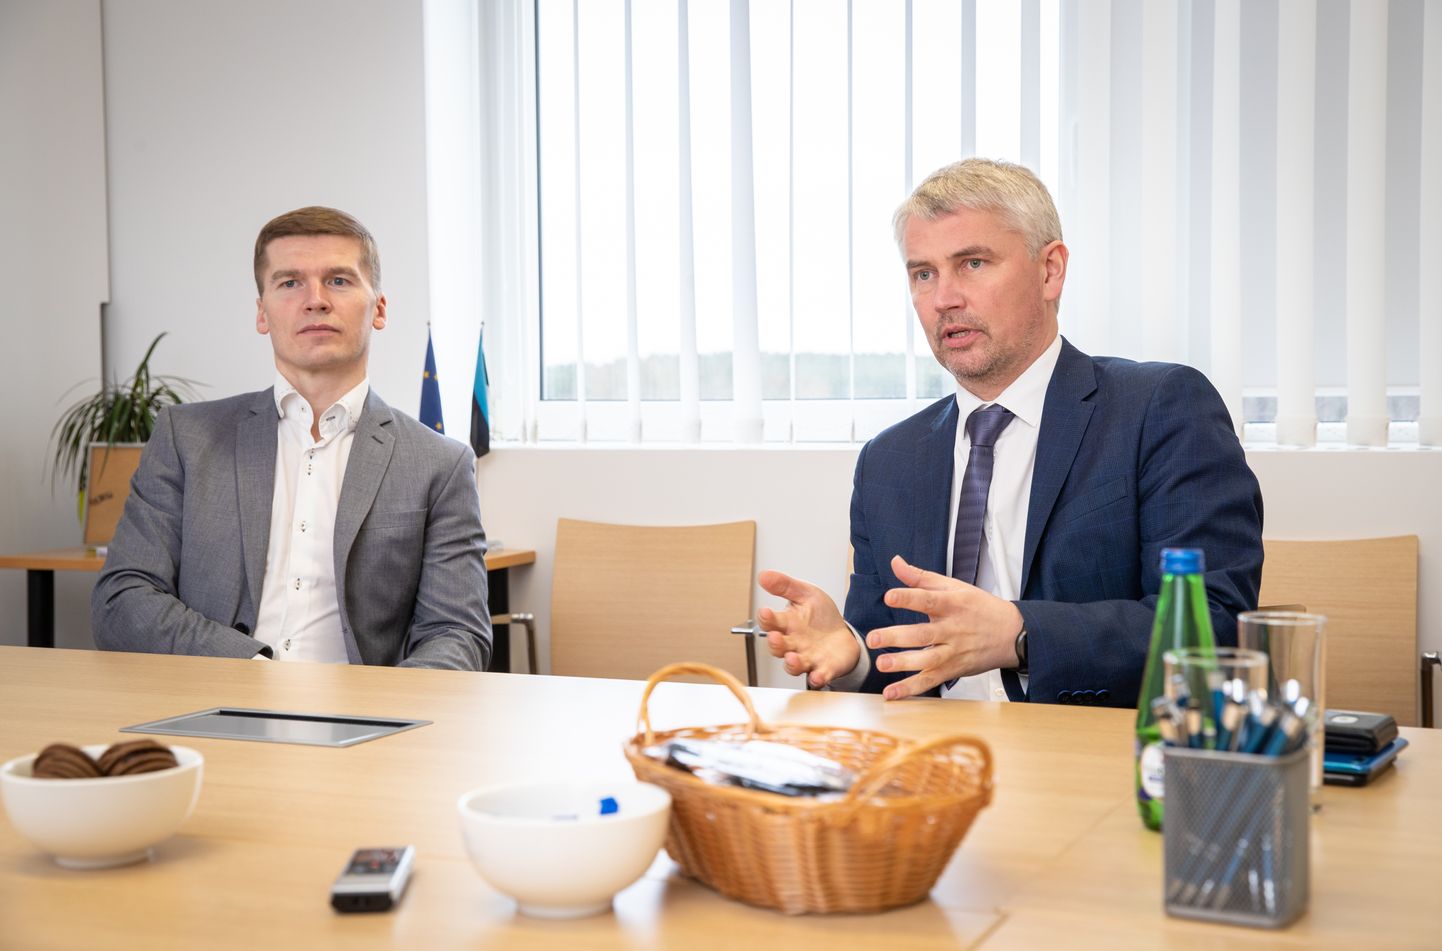 Interview with the director general of the Information System Authority (RIA) appointed Margus Arm (beard) and Lauri Aasmann, Information System Authority (RIA) Director of Cyber Security.